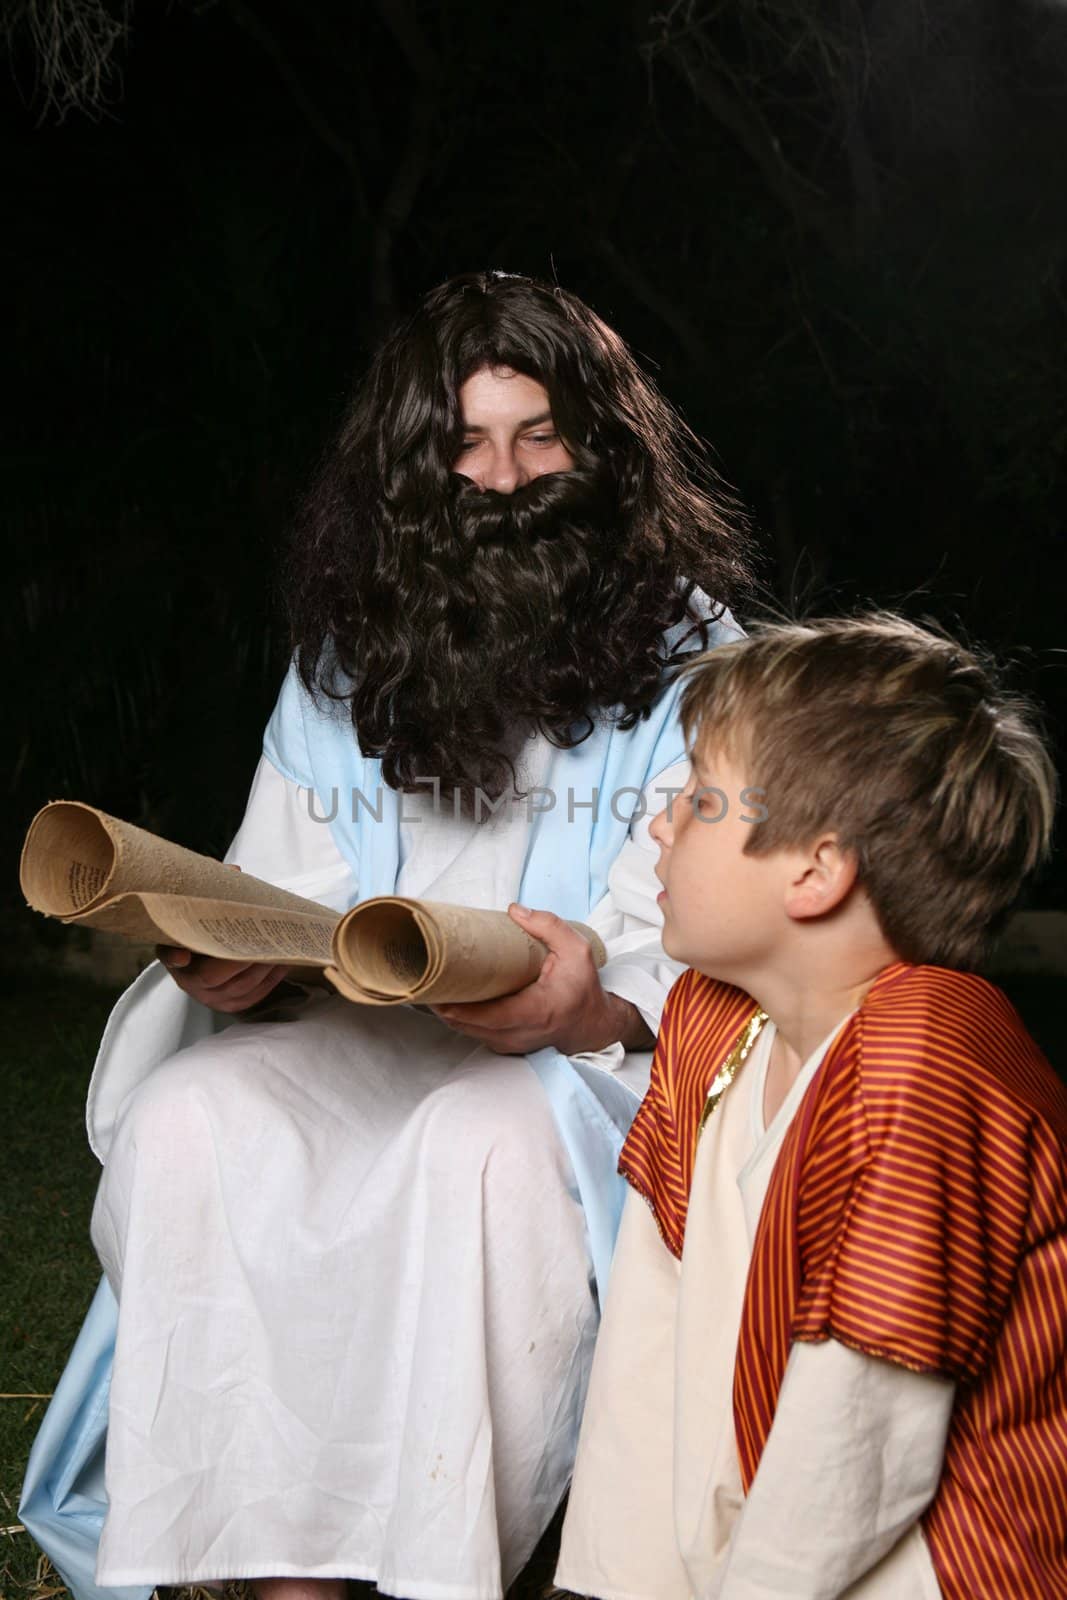 Jesus with a child or other biblical man (eg Elijah the prophet teaching Samuel)  reading and teaching the scriptures to an attentive child.  